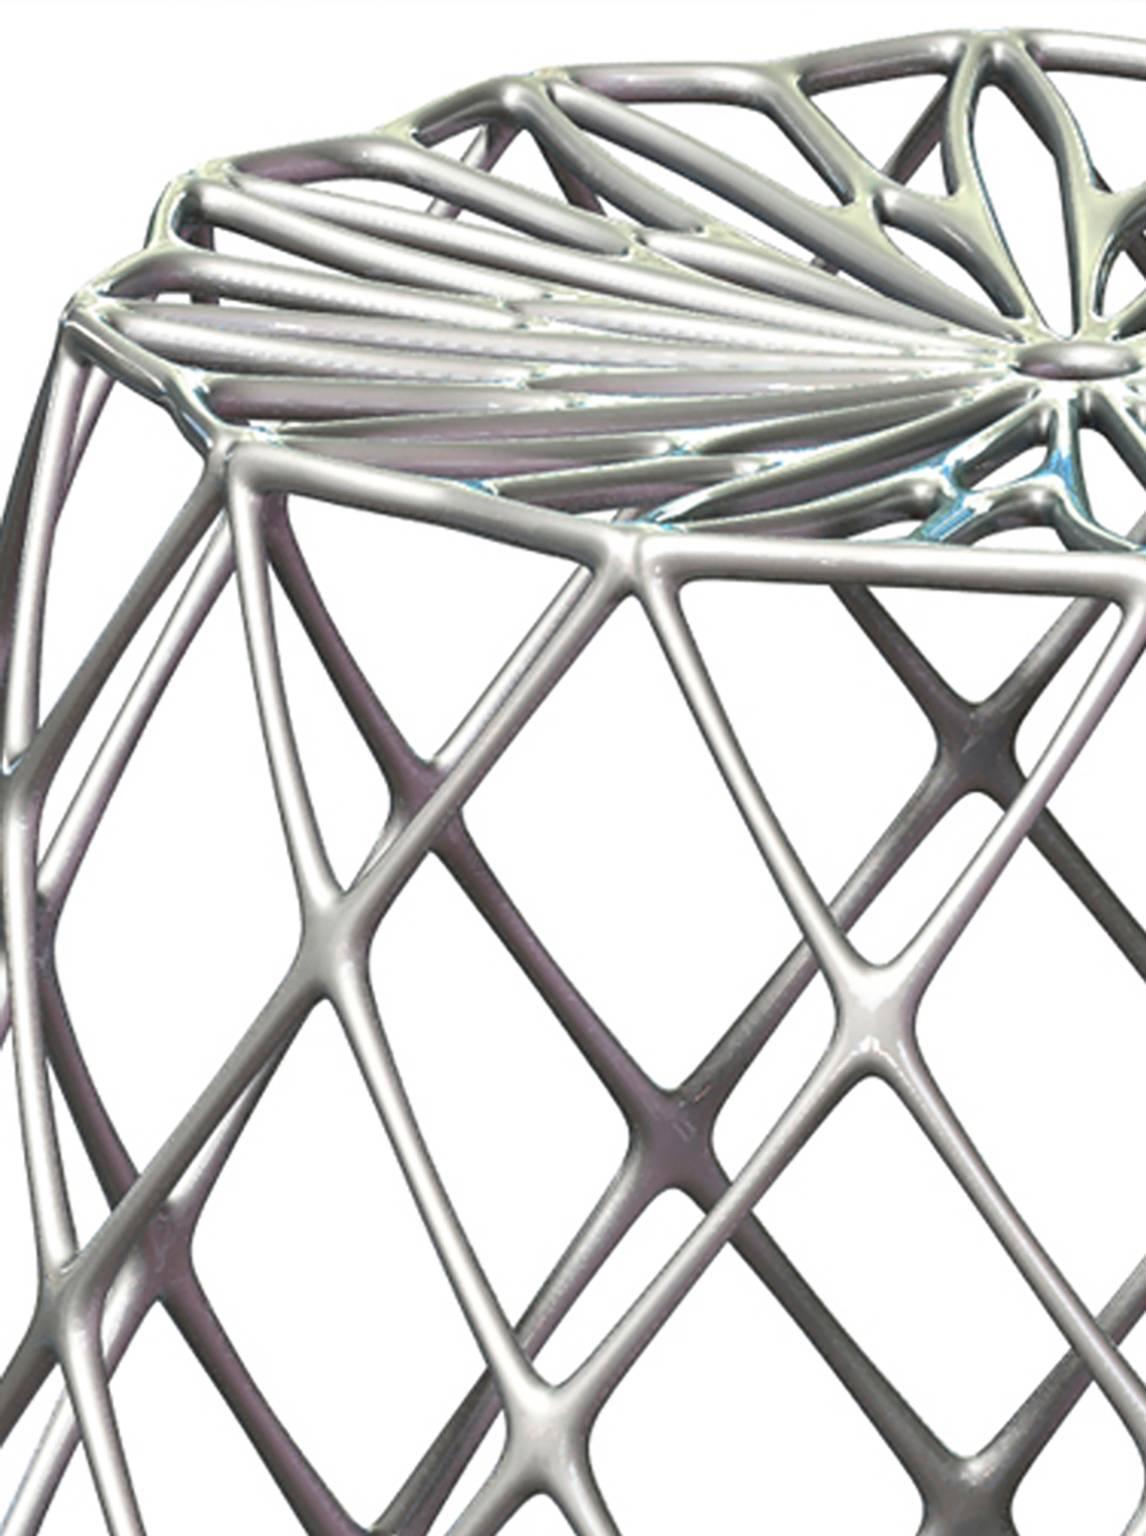 Enrico Bressan, co-founder of Artecnica and an architect by trade, has created a sturdy, lightweight aluminum stool for both indoor and outdoor use. Taking inspiration from the fibrous skeleton of the Staghorn Cholla cactus, the Kaktus stool is